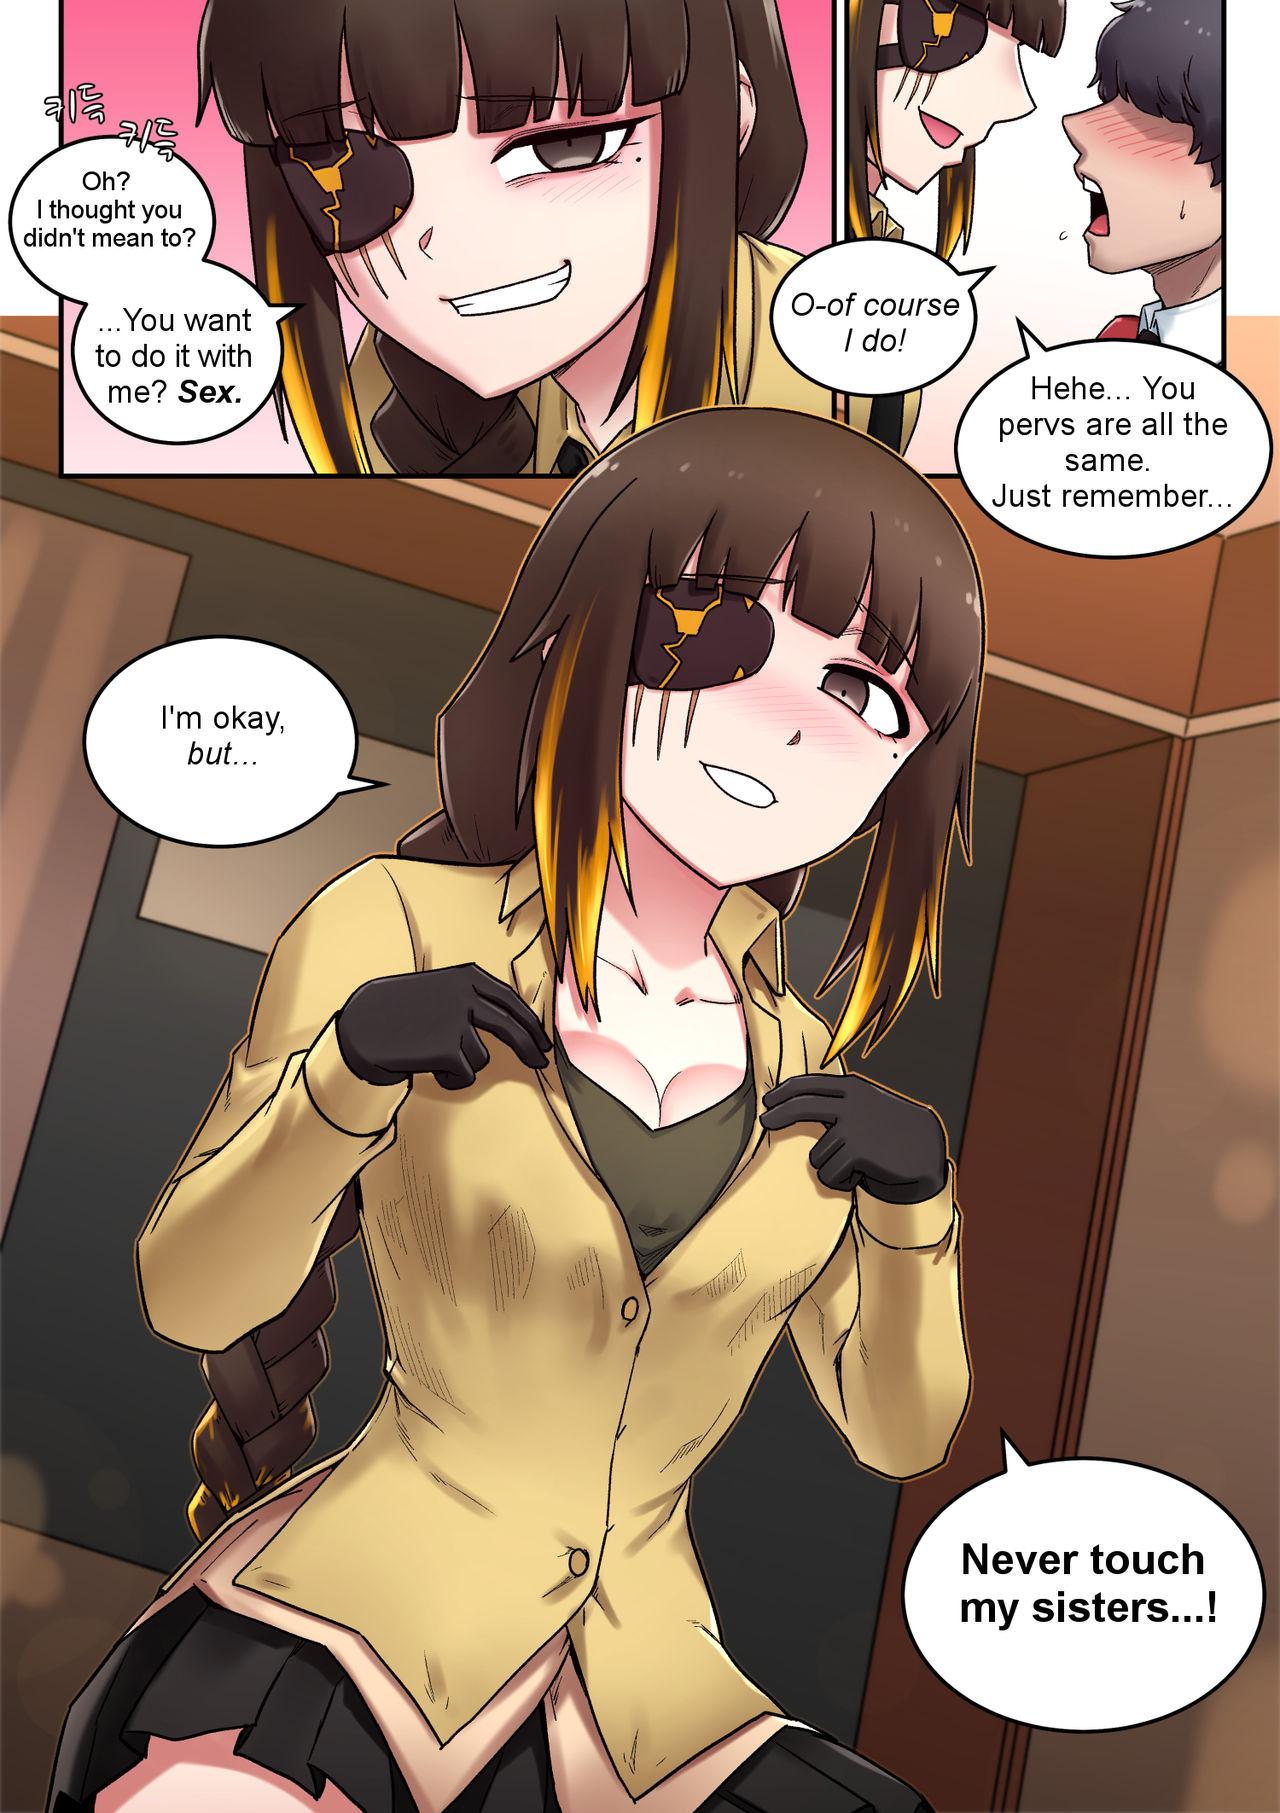 Boys M16 COMIC - Girls frontline Wet Pussy - Page 5